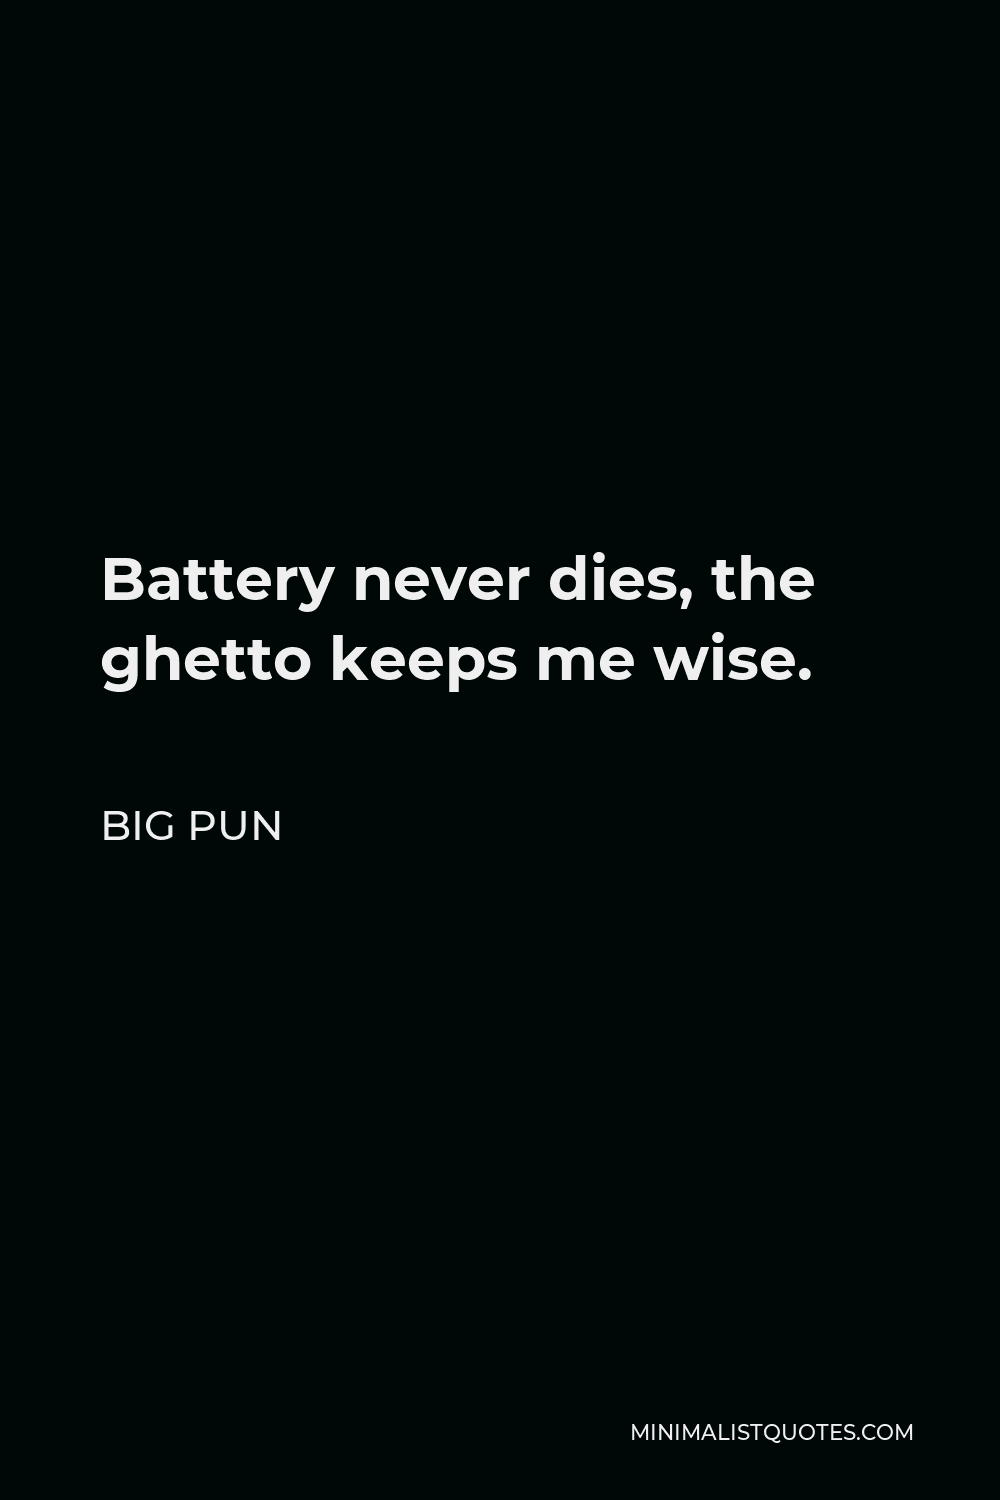 Big Pun Quote - Battery never dies, the ghetto keeps me wise.